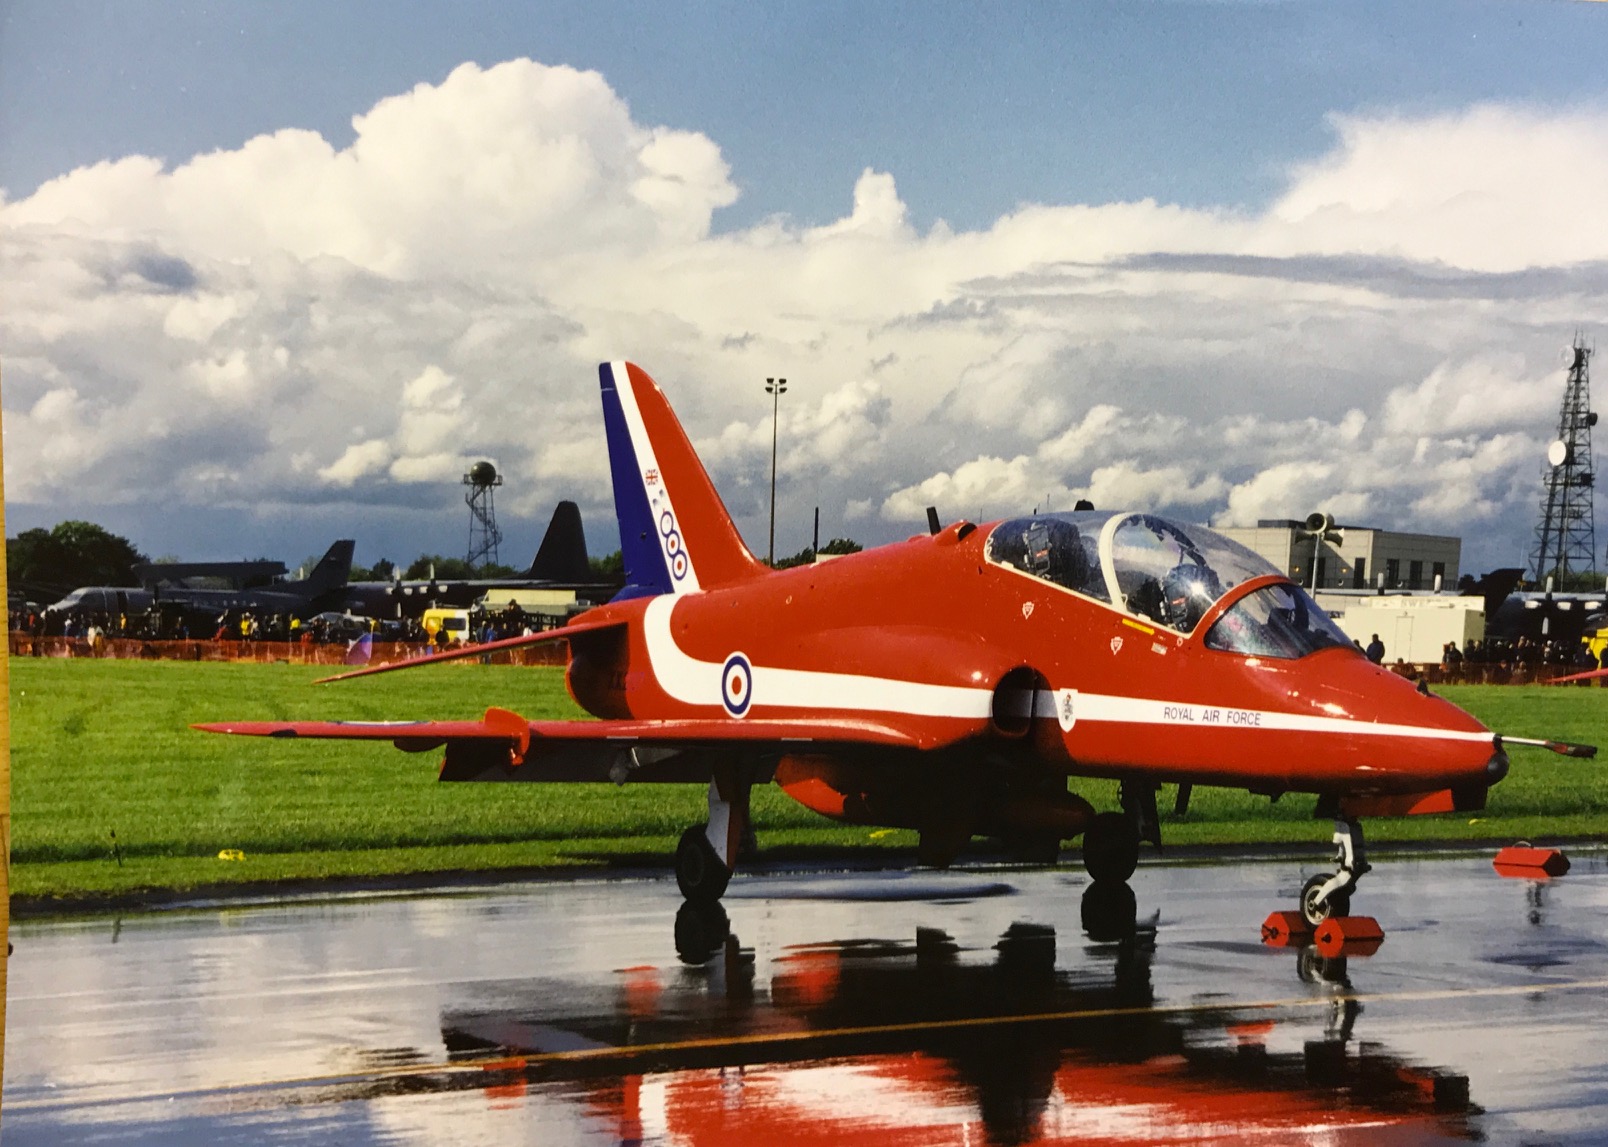 I Died Today: But as we all know. The sun will always follow the rain. One day. When it does, it's a photographers dream. Best picture of a Red Arrow ever.